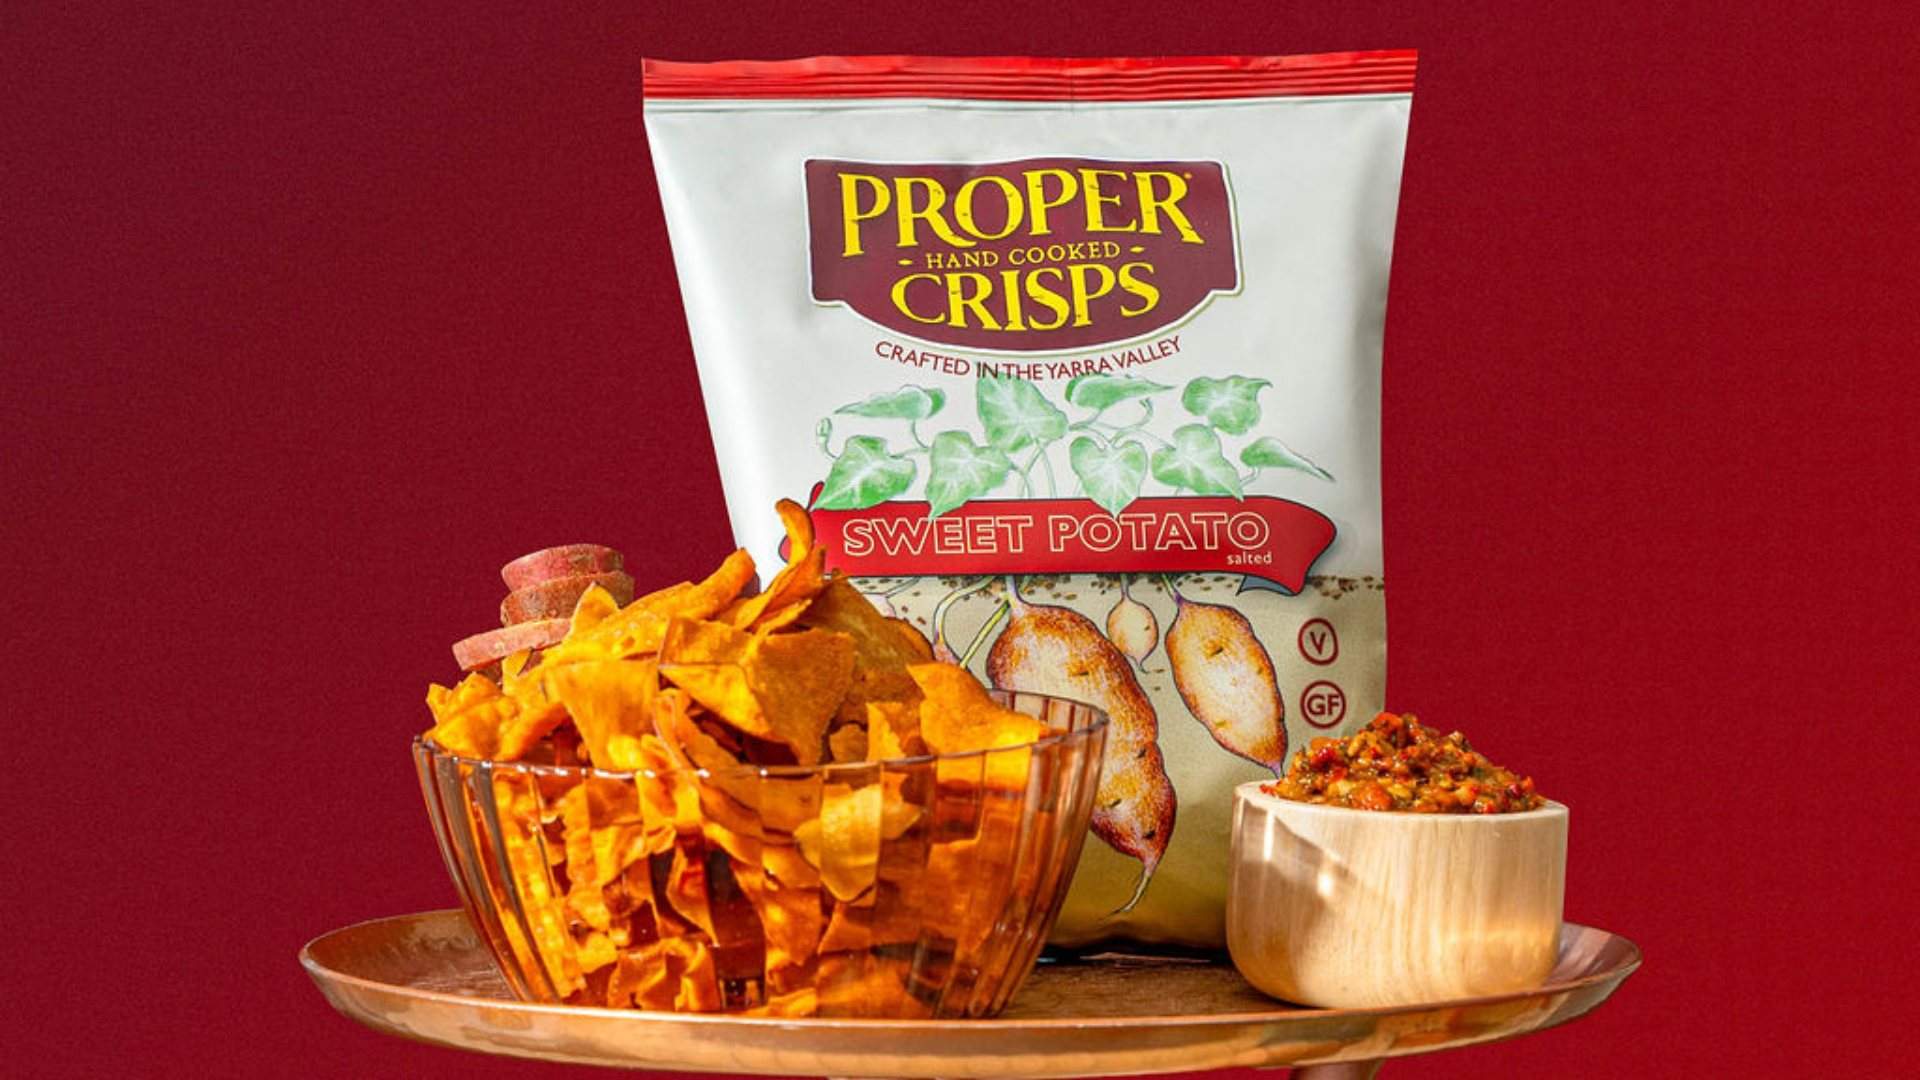 Proper Crisps Has Made a Big Change to One Key Ingredient Thanks to Our Mates Across the Ditch